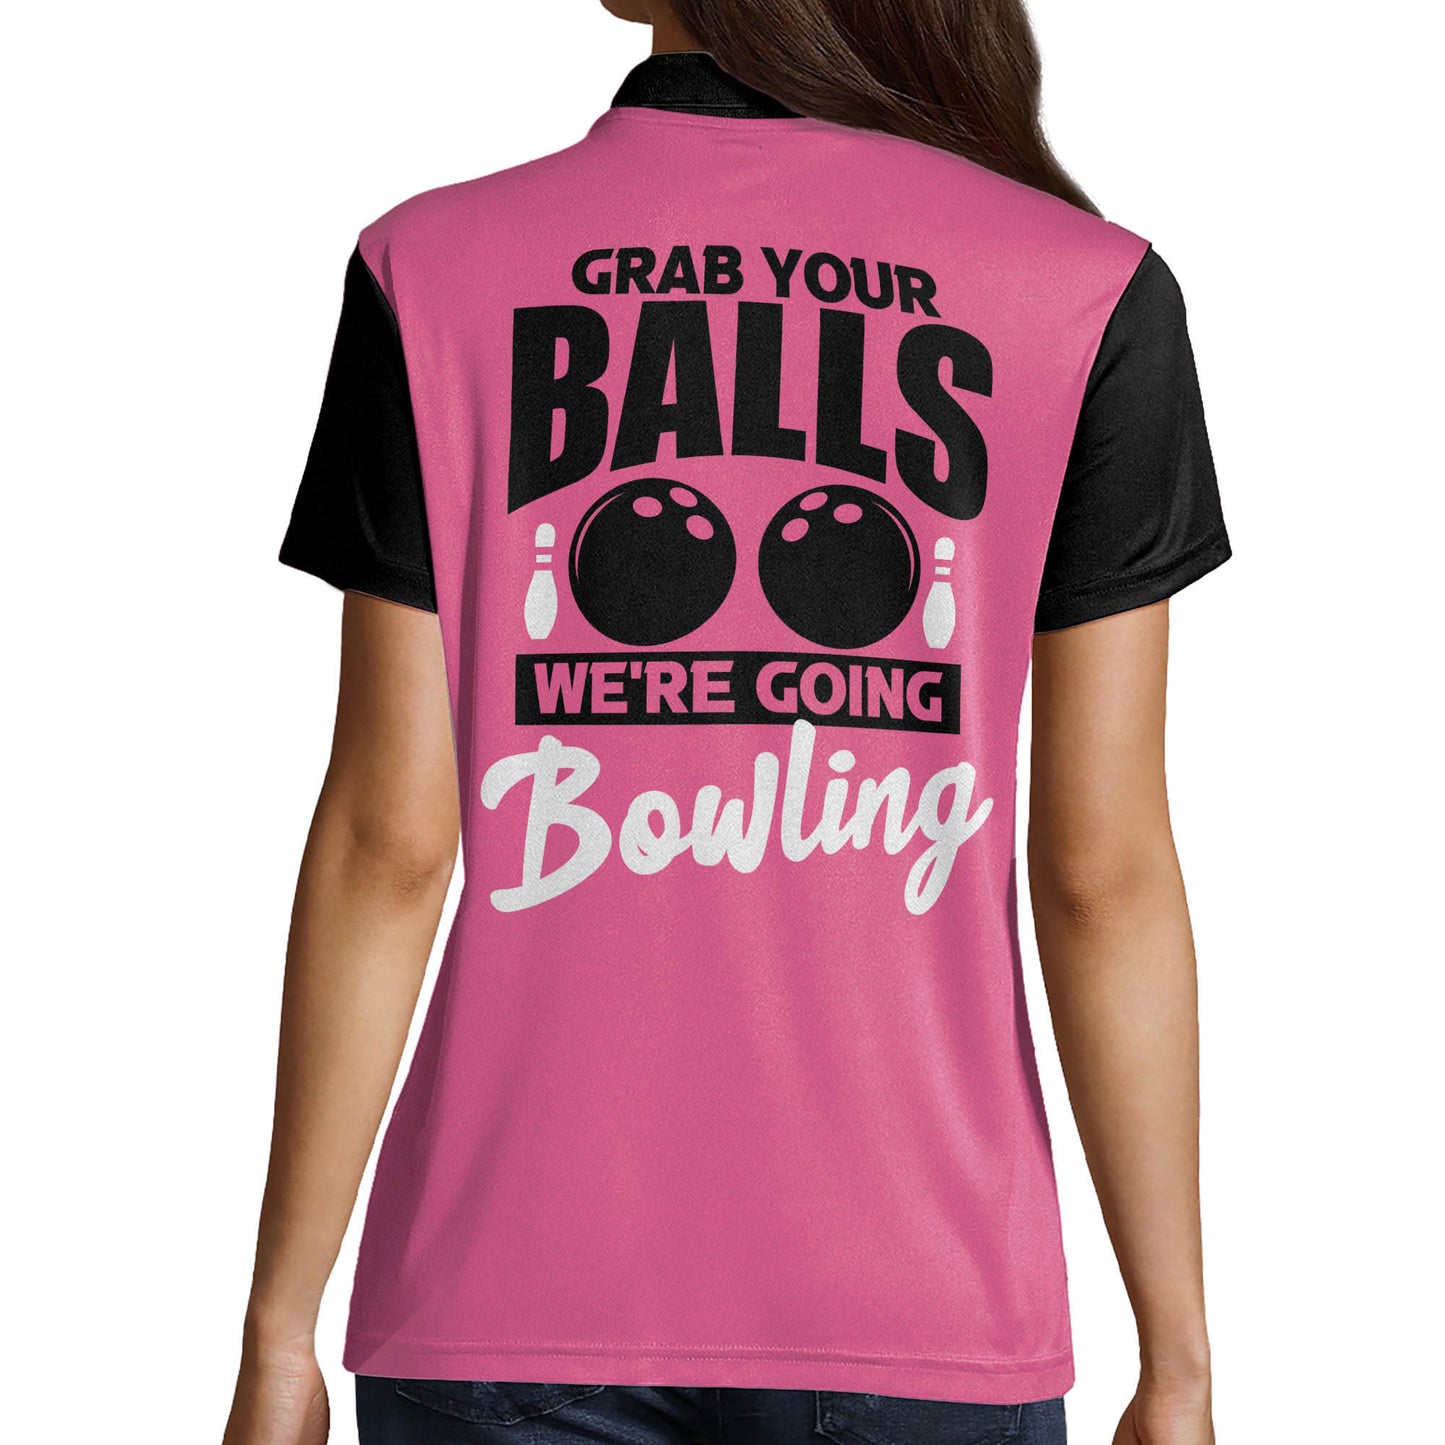 Custom Bowling Shirts For Women - Custom Pink Bowling Shirts Funny - Women's Crazy Bowling Polo Shirts With Name - Grab Your Balls We're Going Bowling BW0042